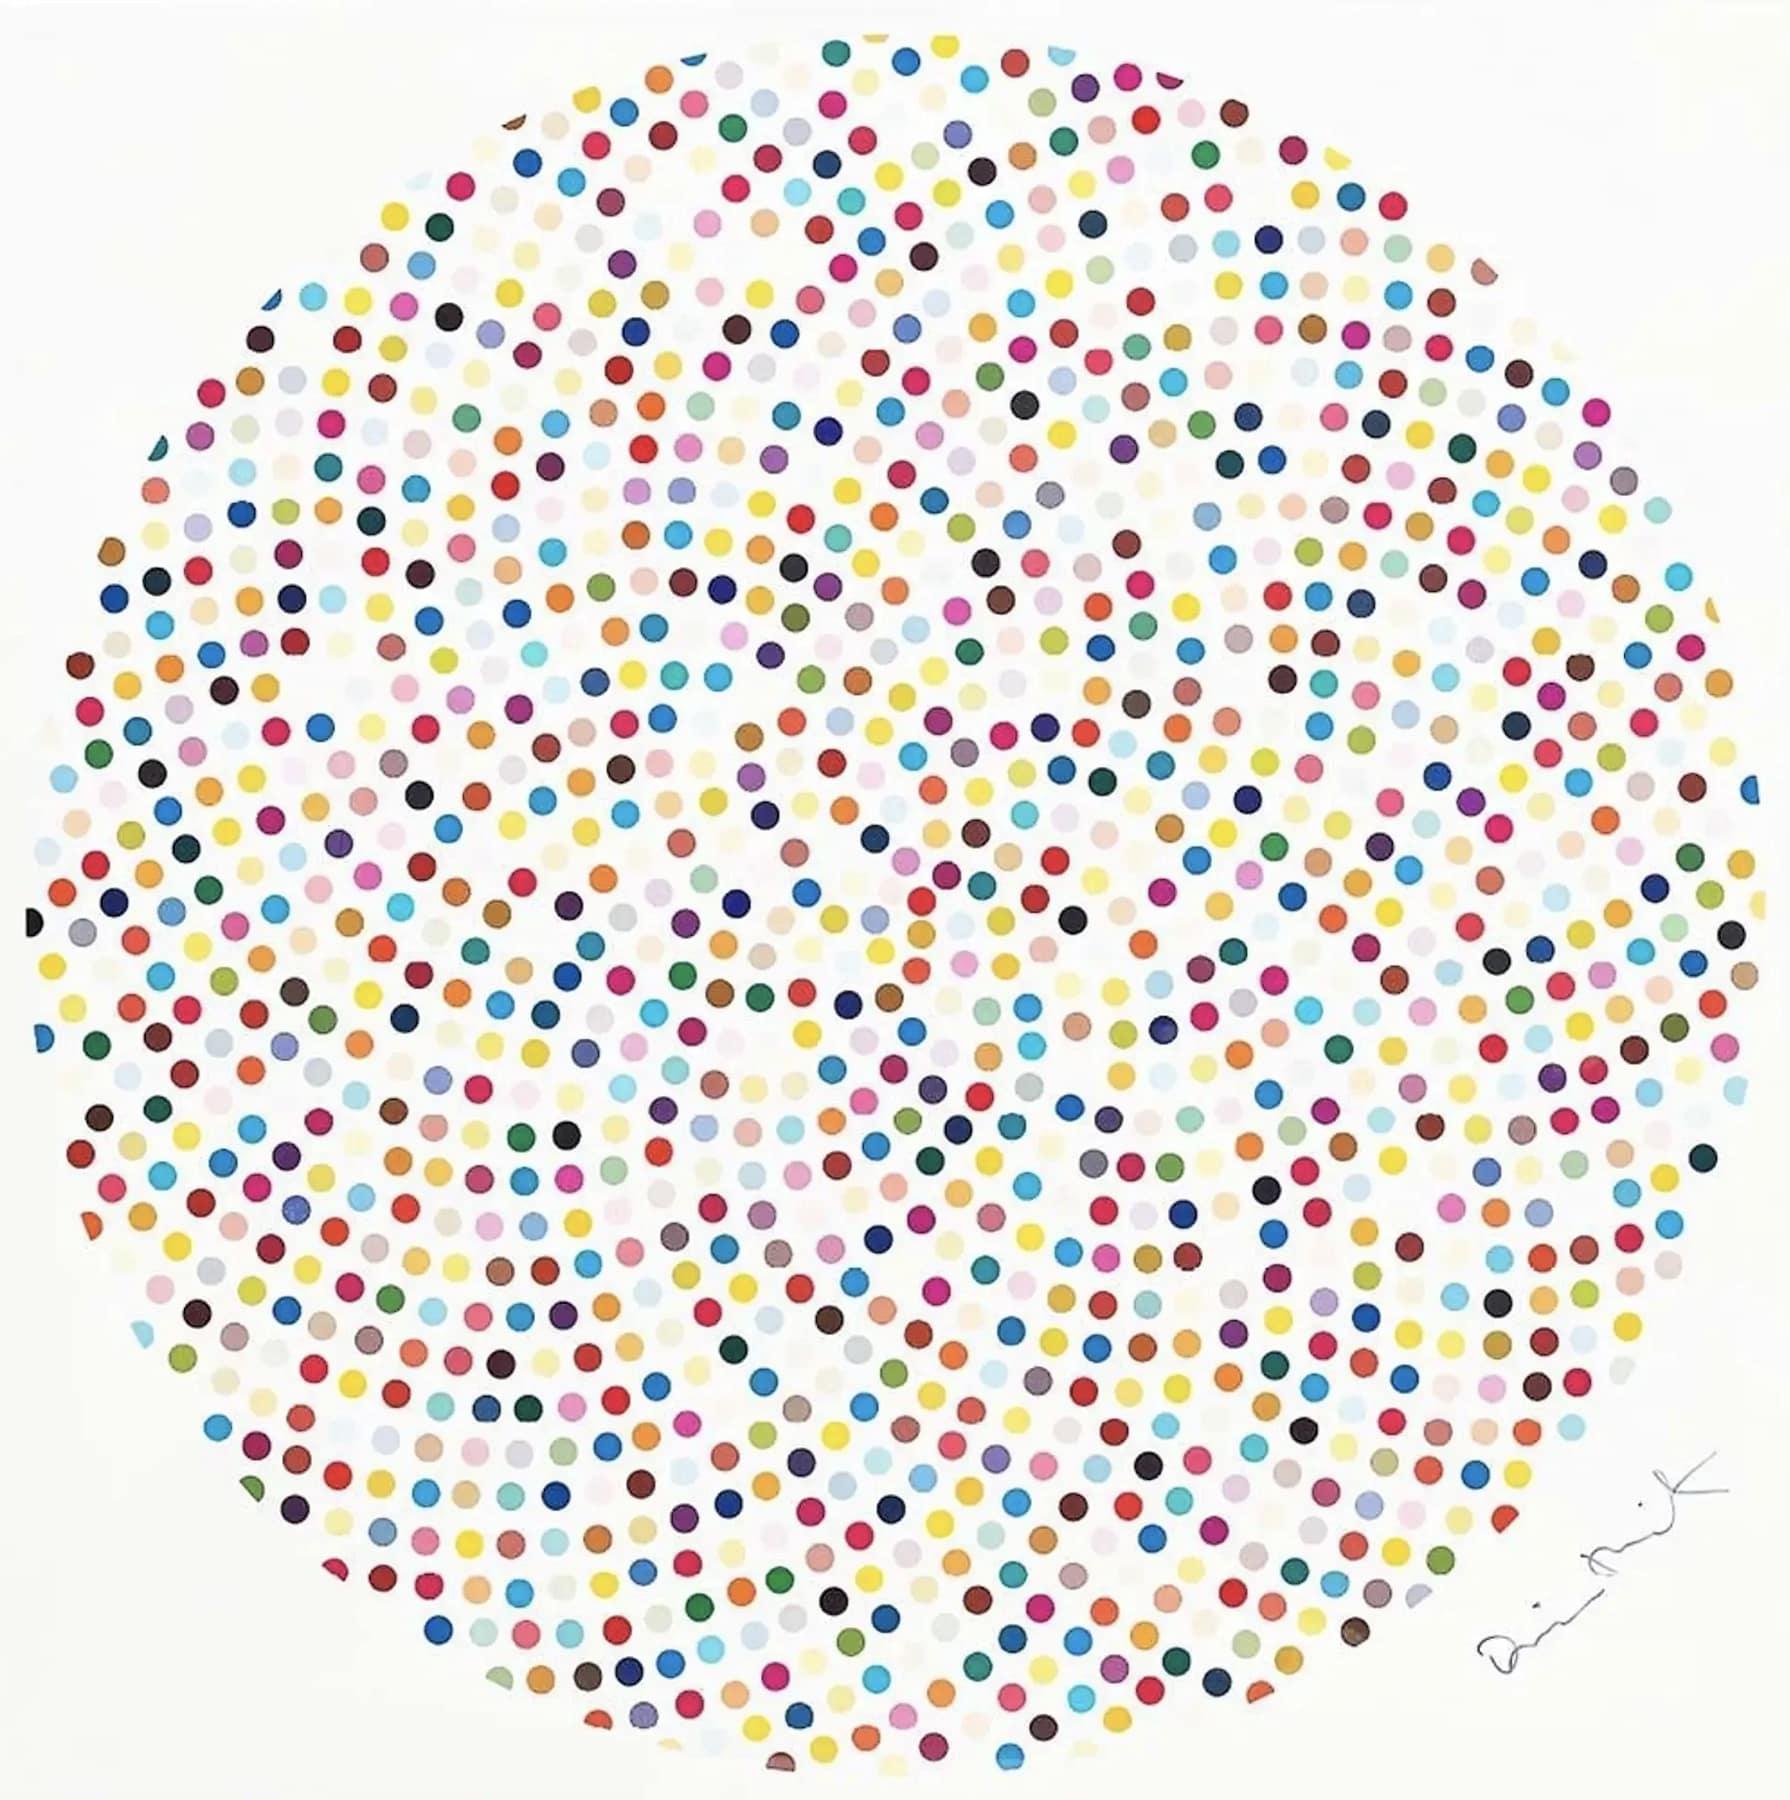 By Damien Hirst 

VALIUM, 2014
Digital print
49 1/4 x 49 1/4 in
125 x 125 cm
Edition of 500
Signed, dated and numbered by the artist